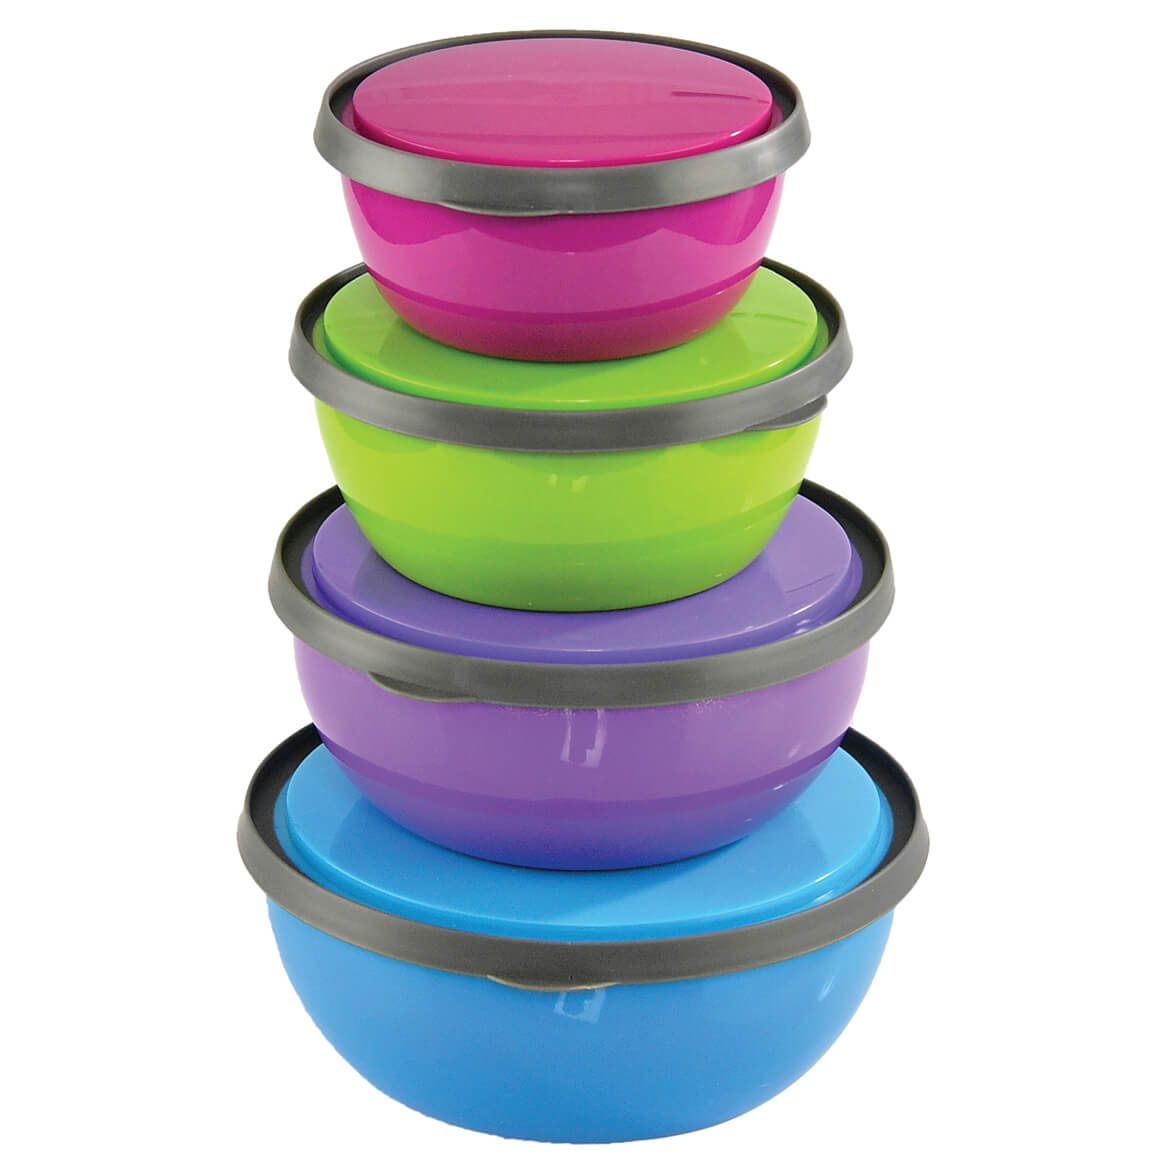 Colored Stainless Steel Bowls with Lids, Set of 4 + '-' + 376041